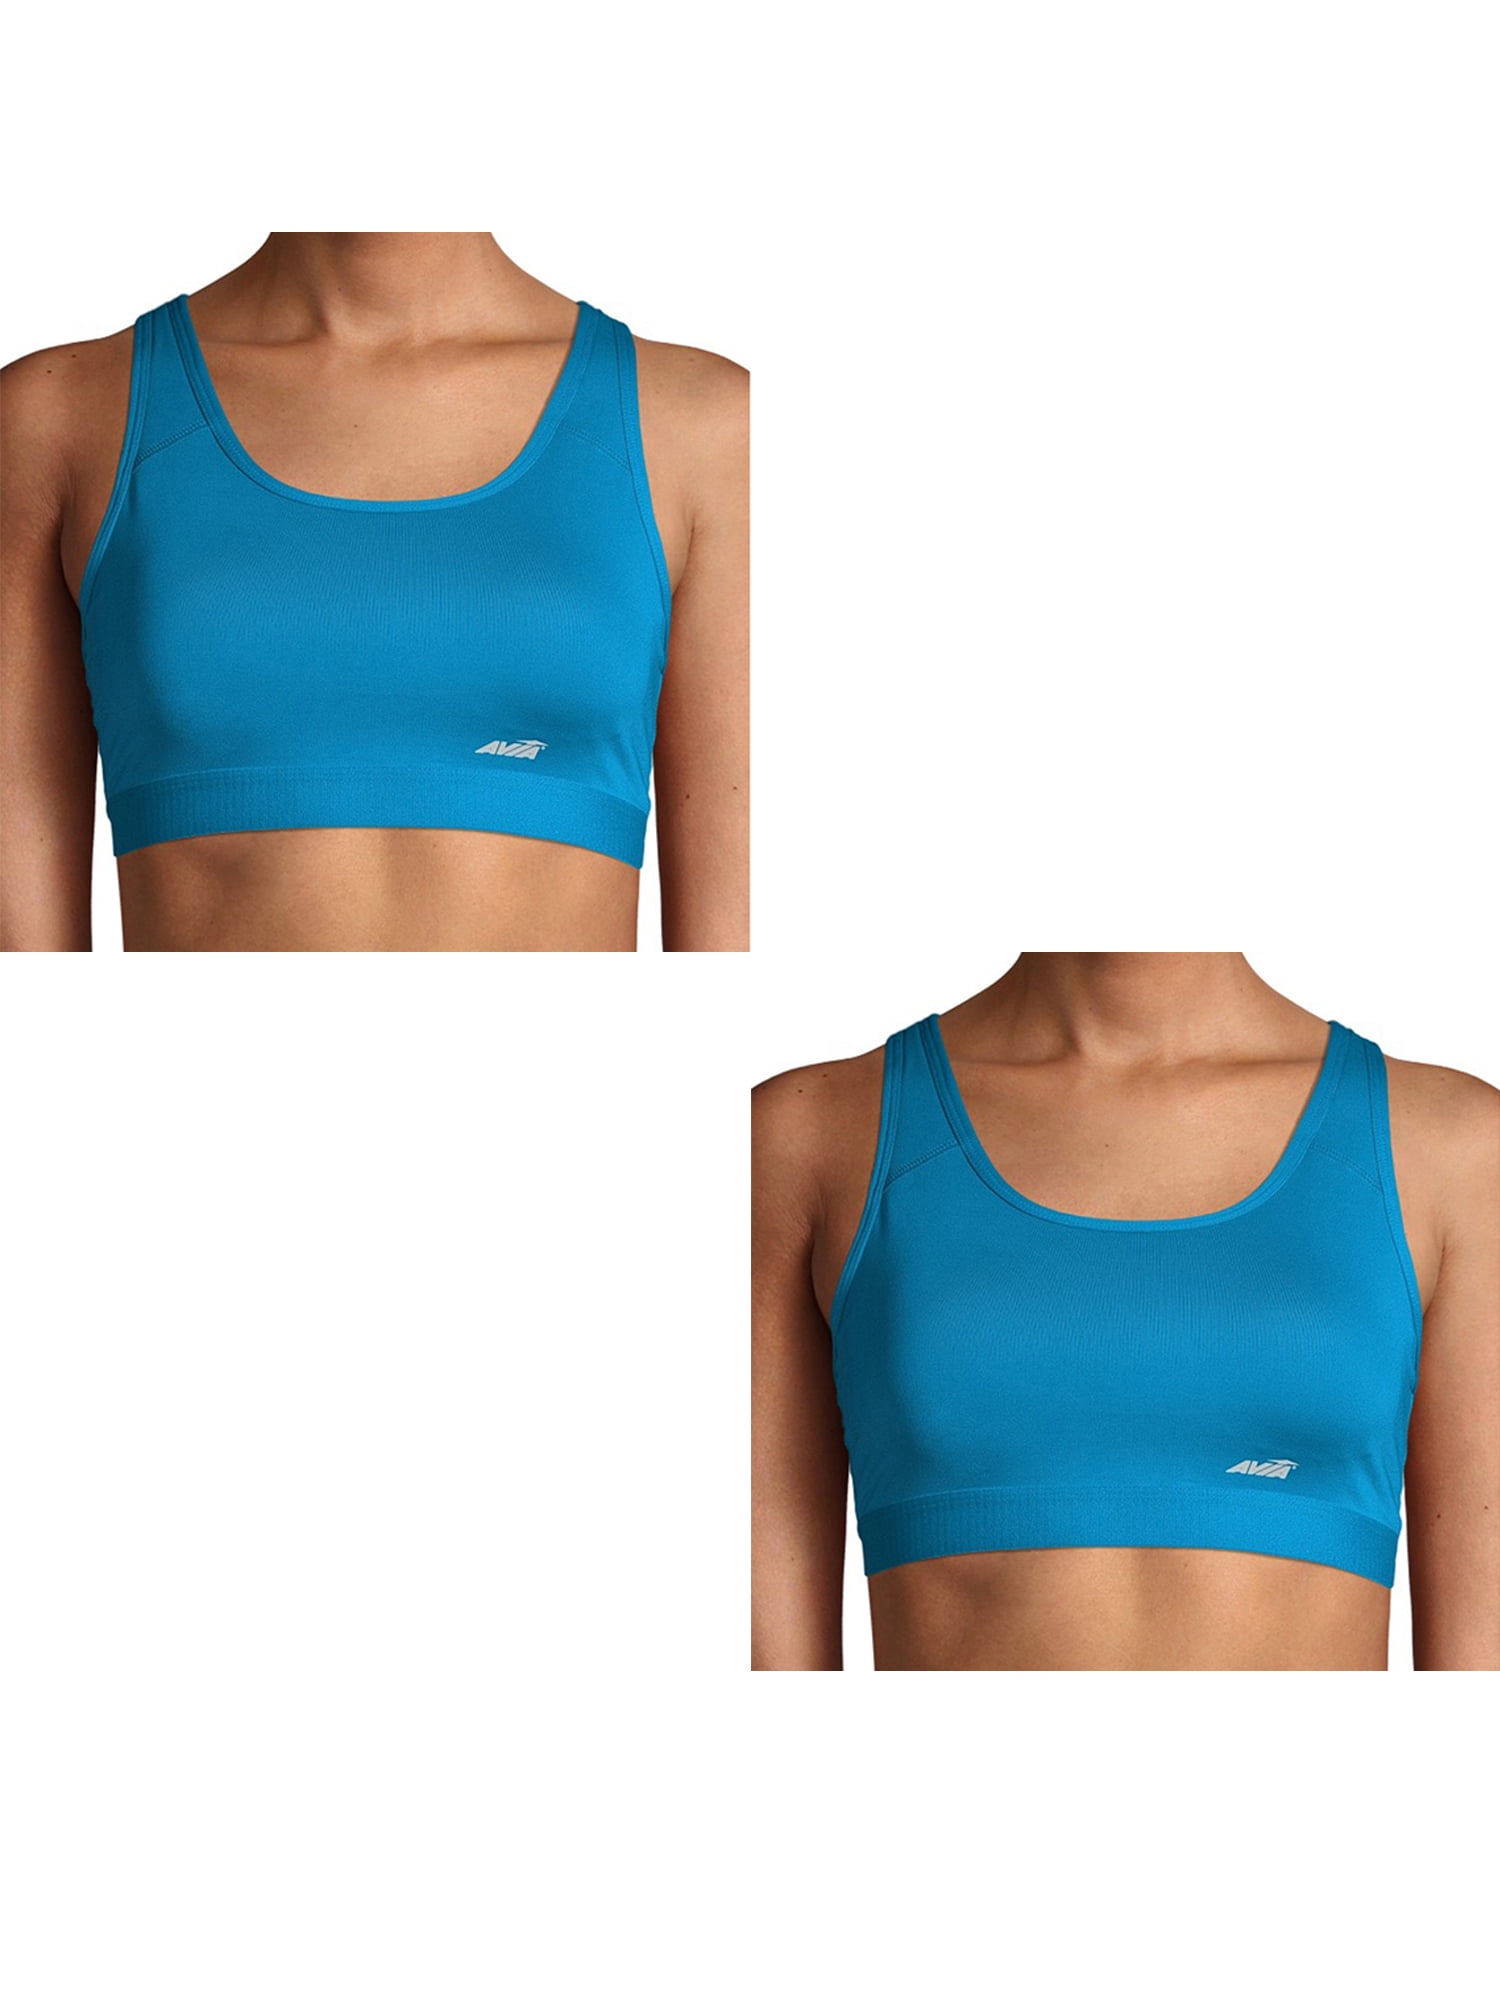 NEW tags-Avia Sport Sports Bra-choose size & color-medium support-athletic  wear